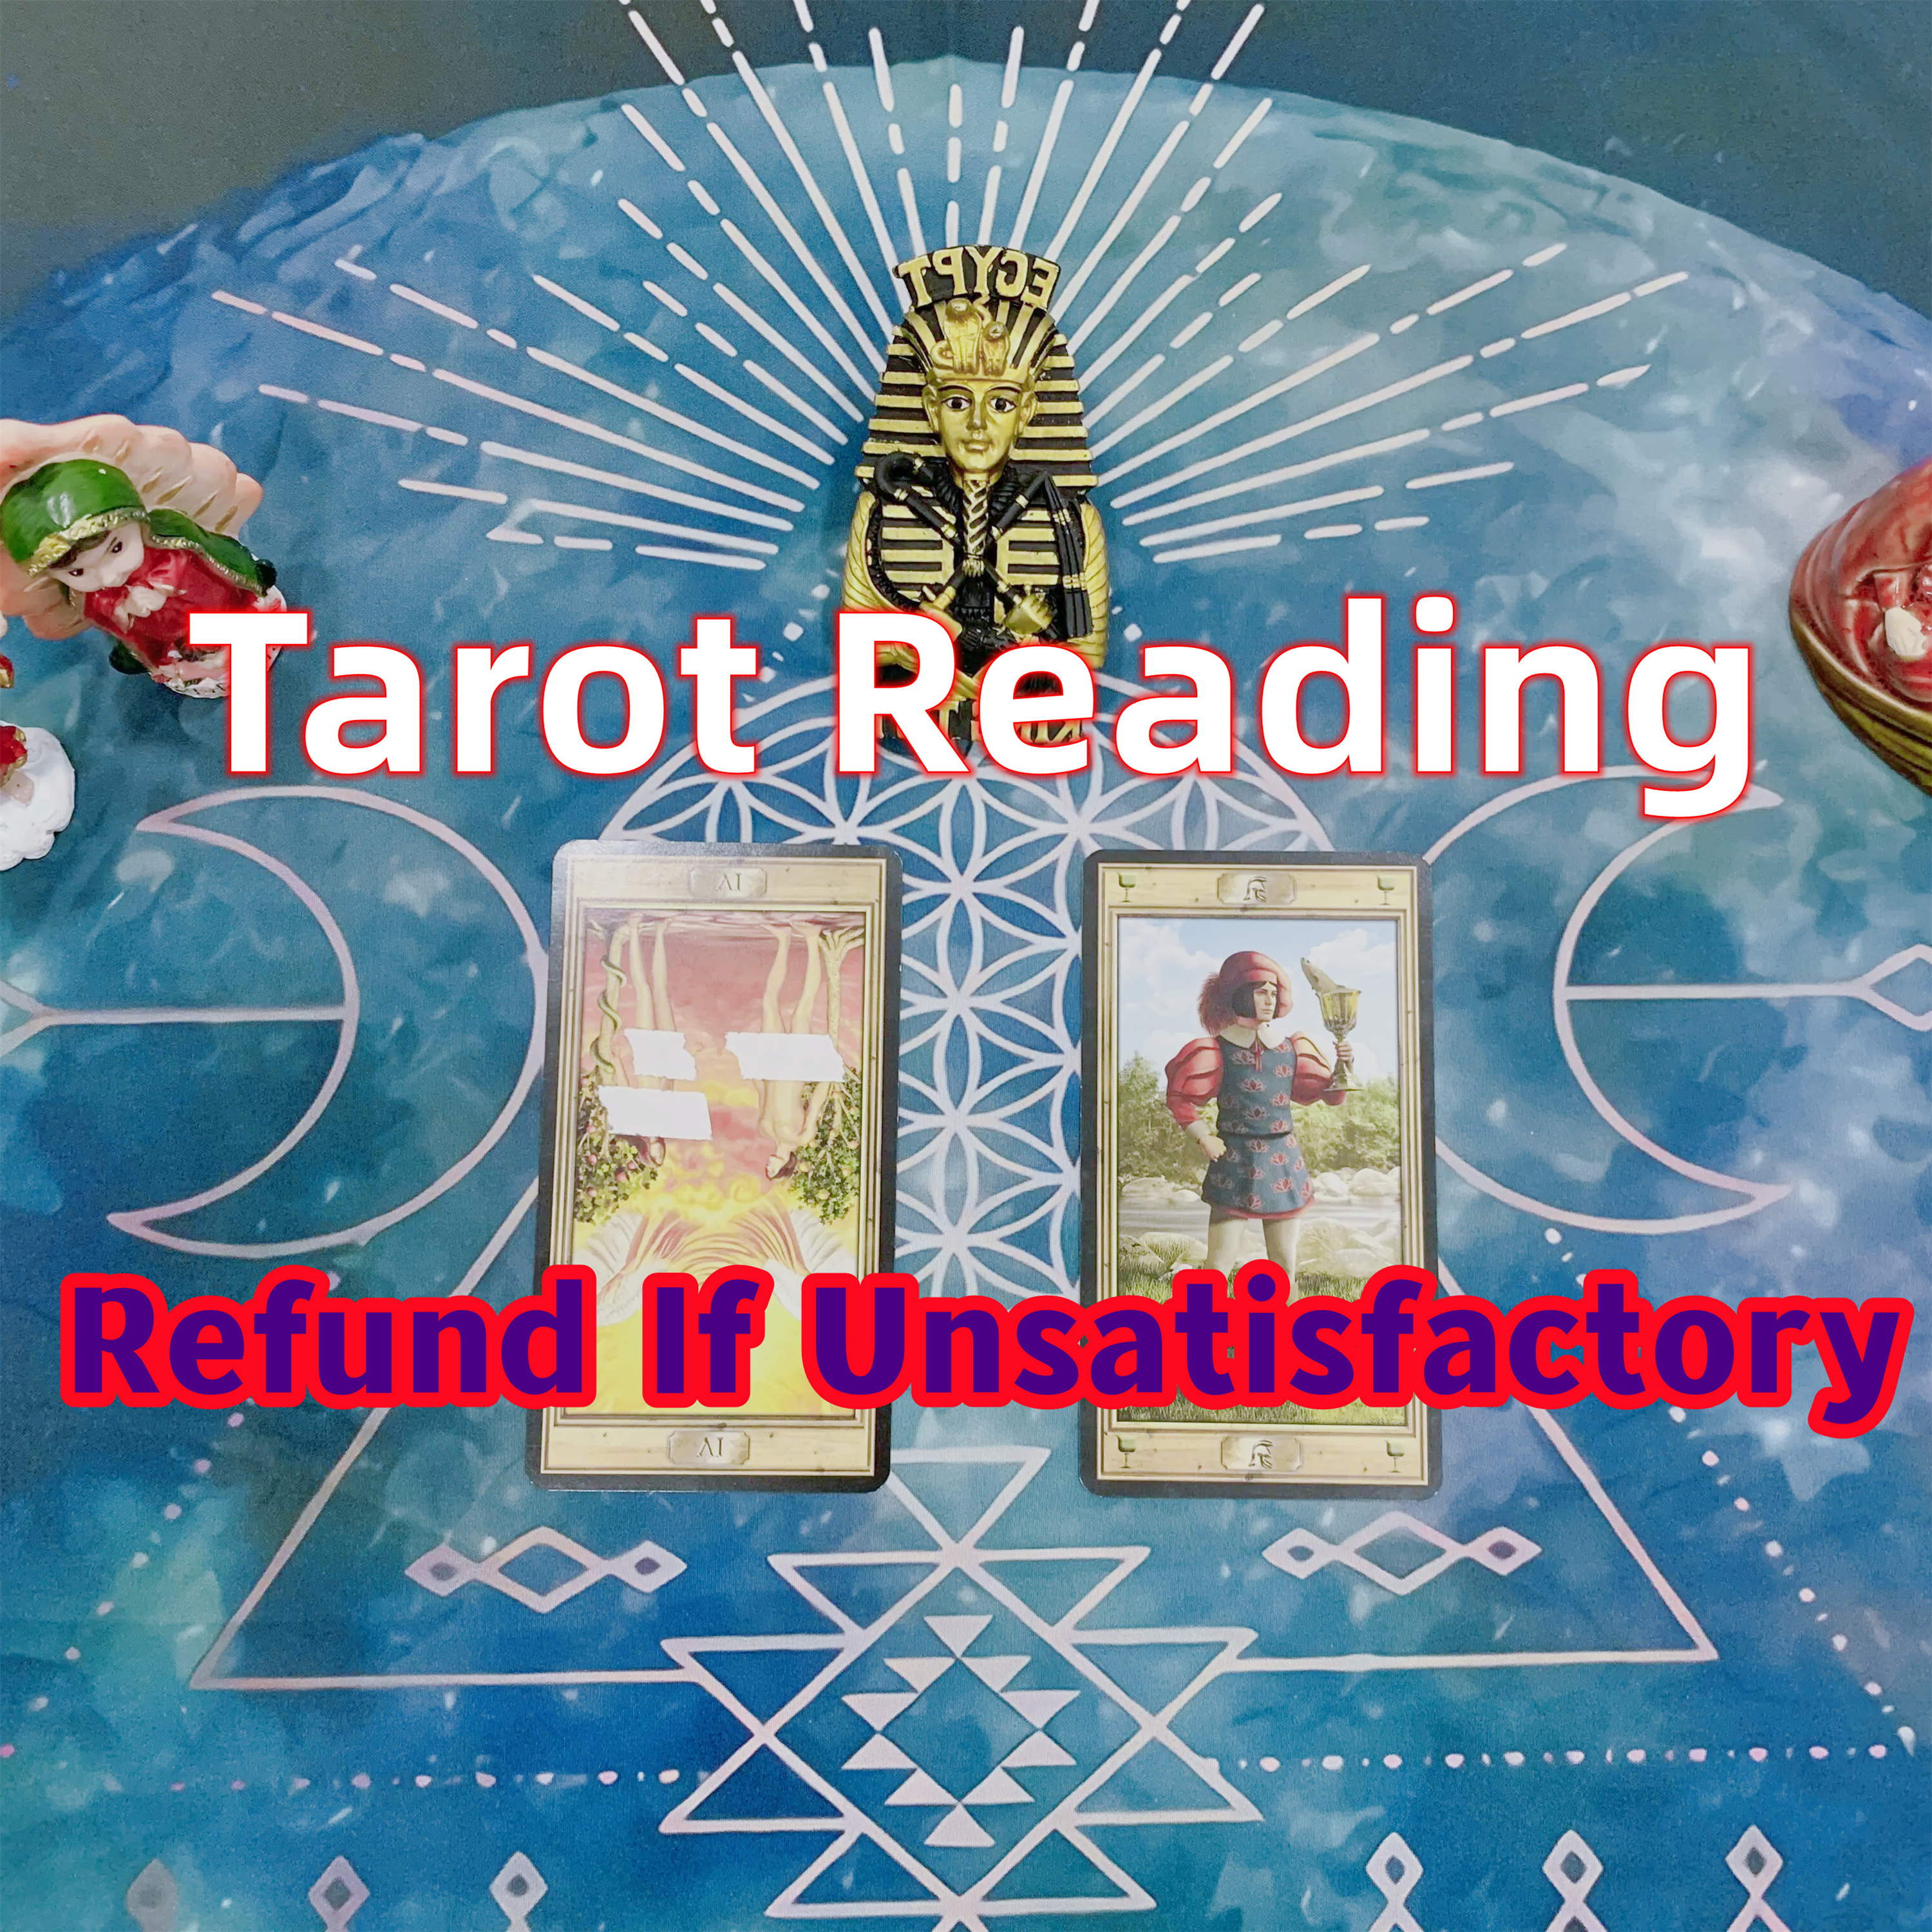 Tarot Card Readings Same Hour Same Day Fast Response Card Reading, Psychic, Life Coach, Reading by Clairvoyant